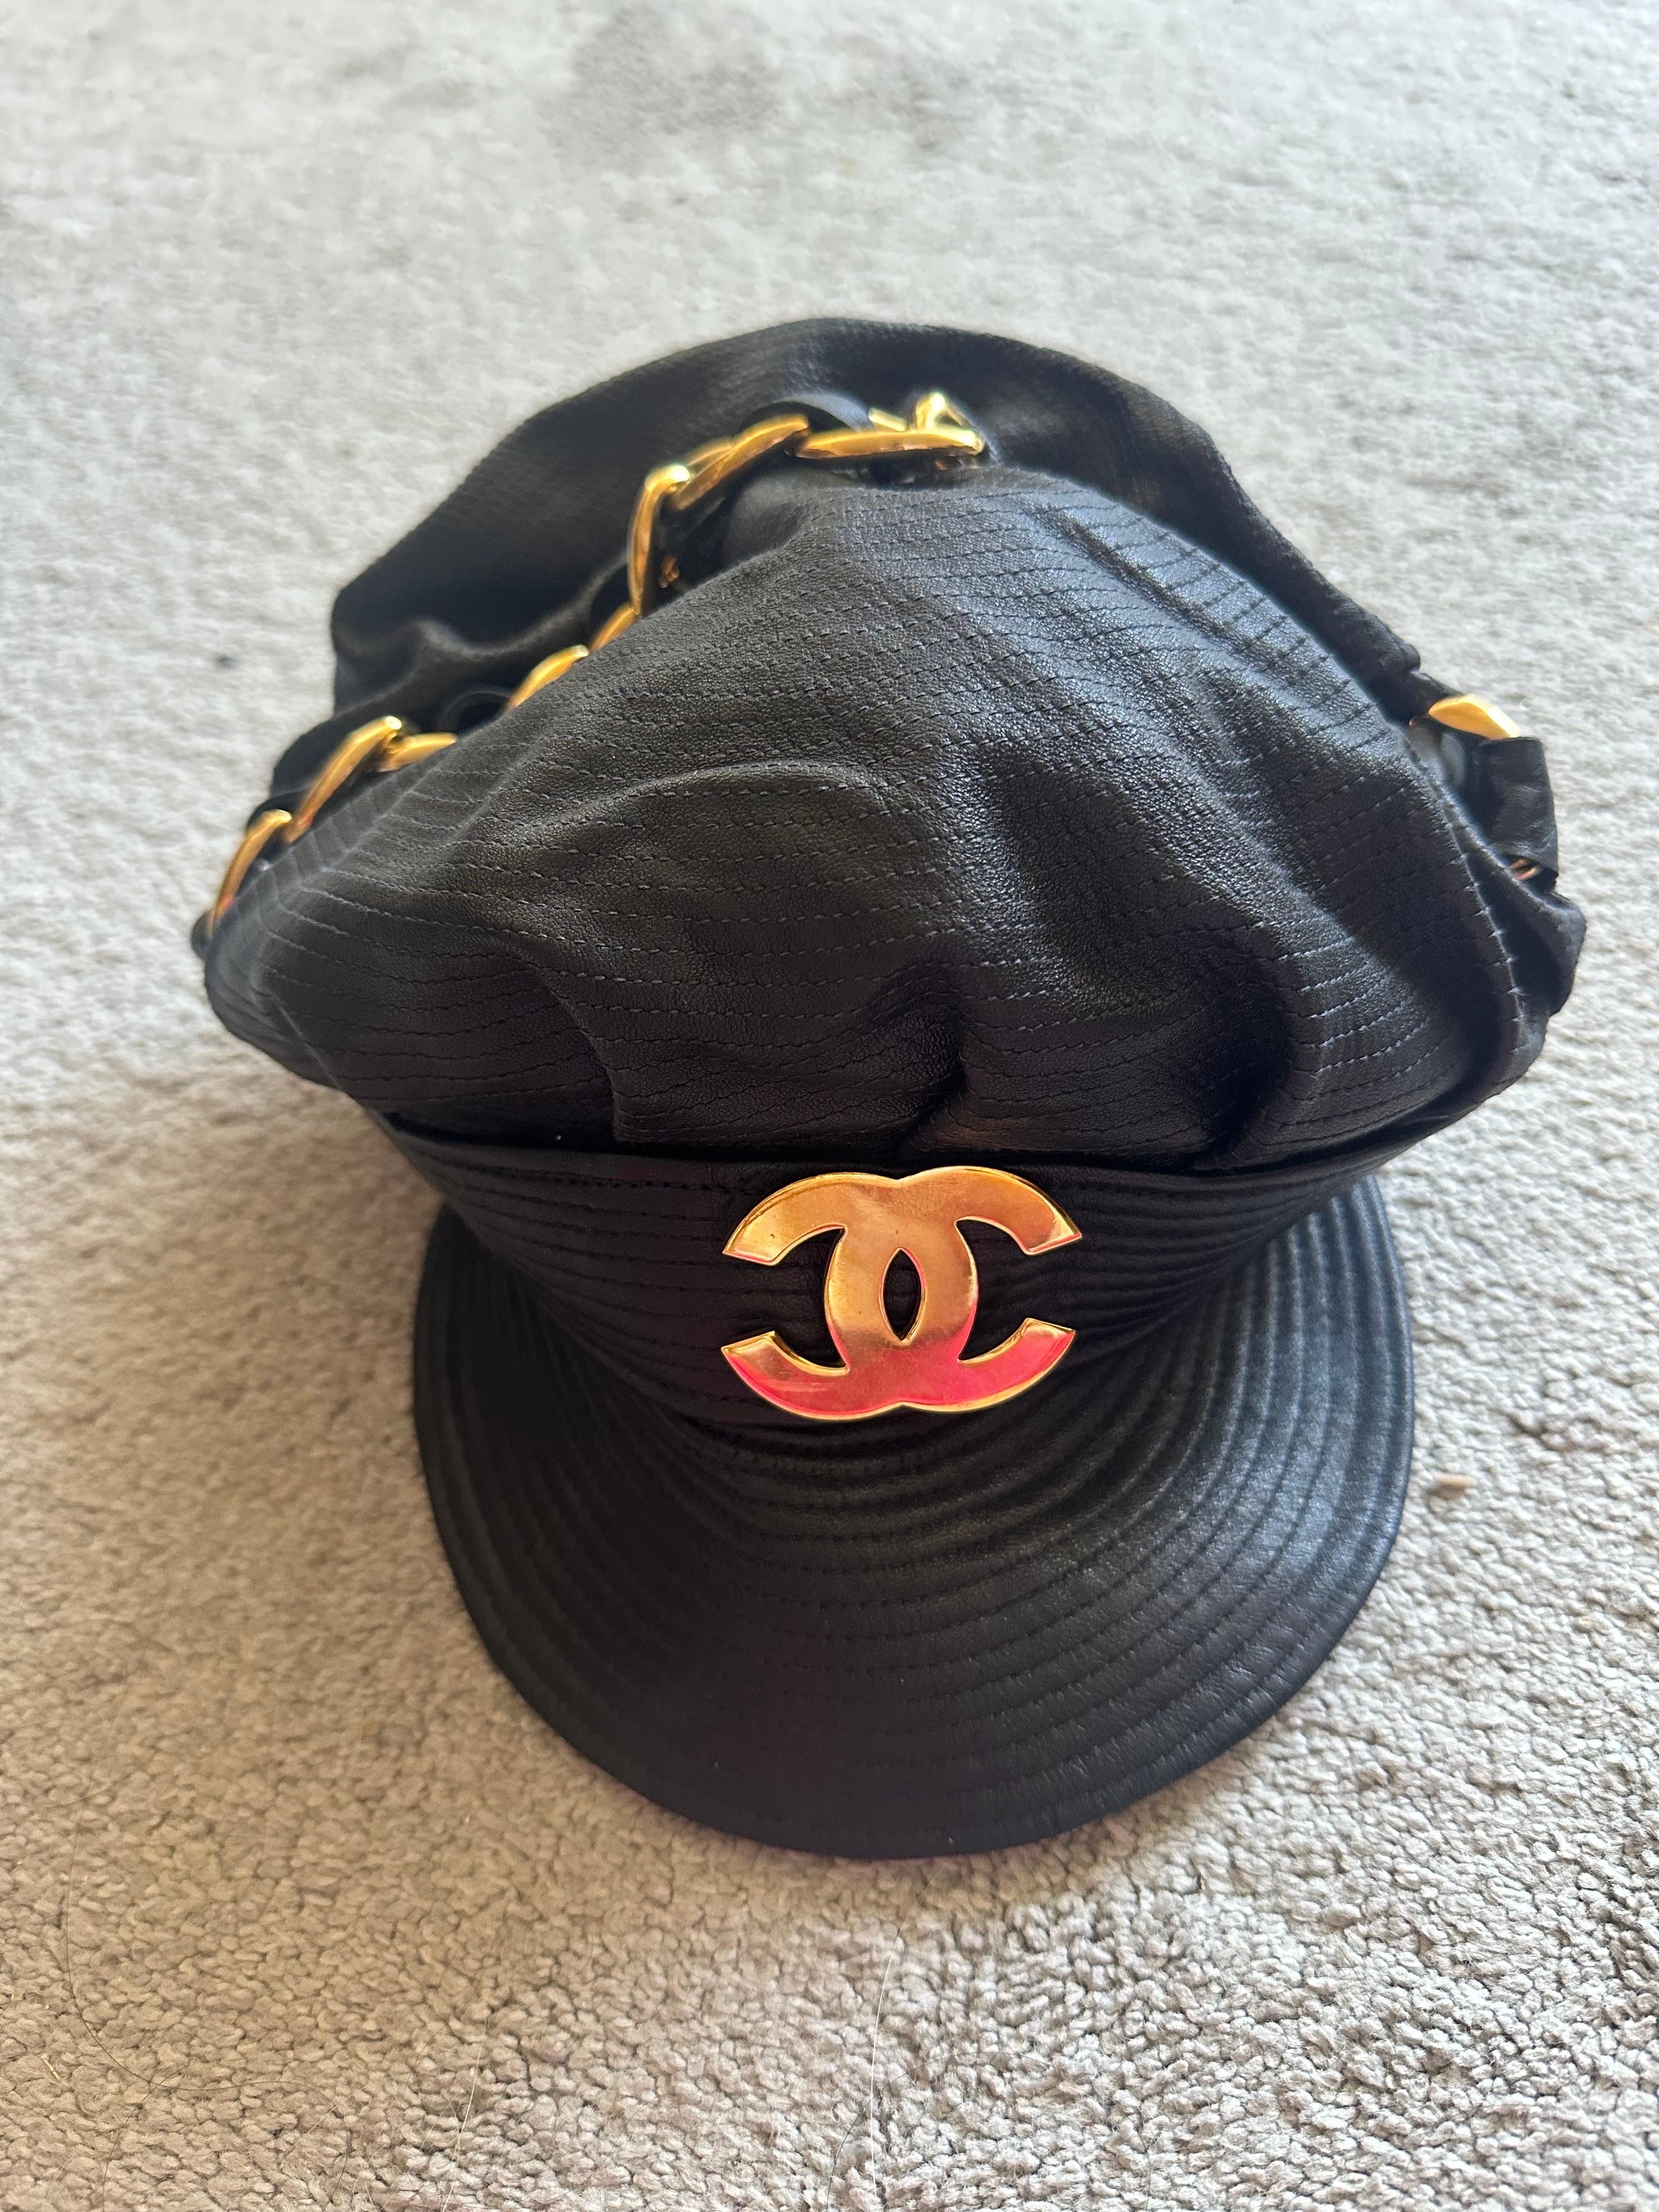 Chanel Fall 1991 Iconic Leather Chain Biker Hat

Iconic leather biker hat in black adorned with gold Chanel logo hardware from the fall 1991 collection designed by Karl Lagerfeld for Chanel. Size 57 (Fits like a size small)

Good overall condition -